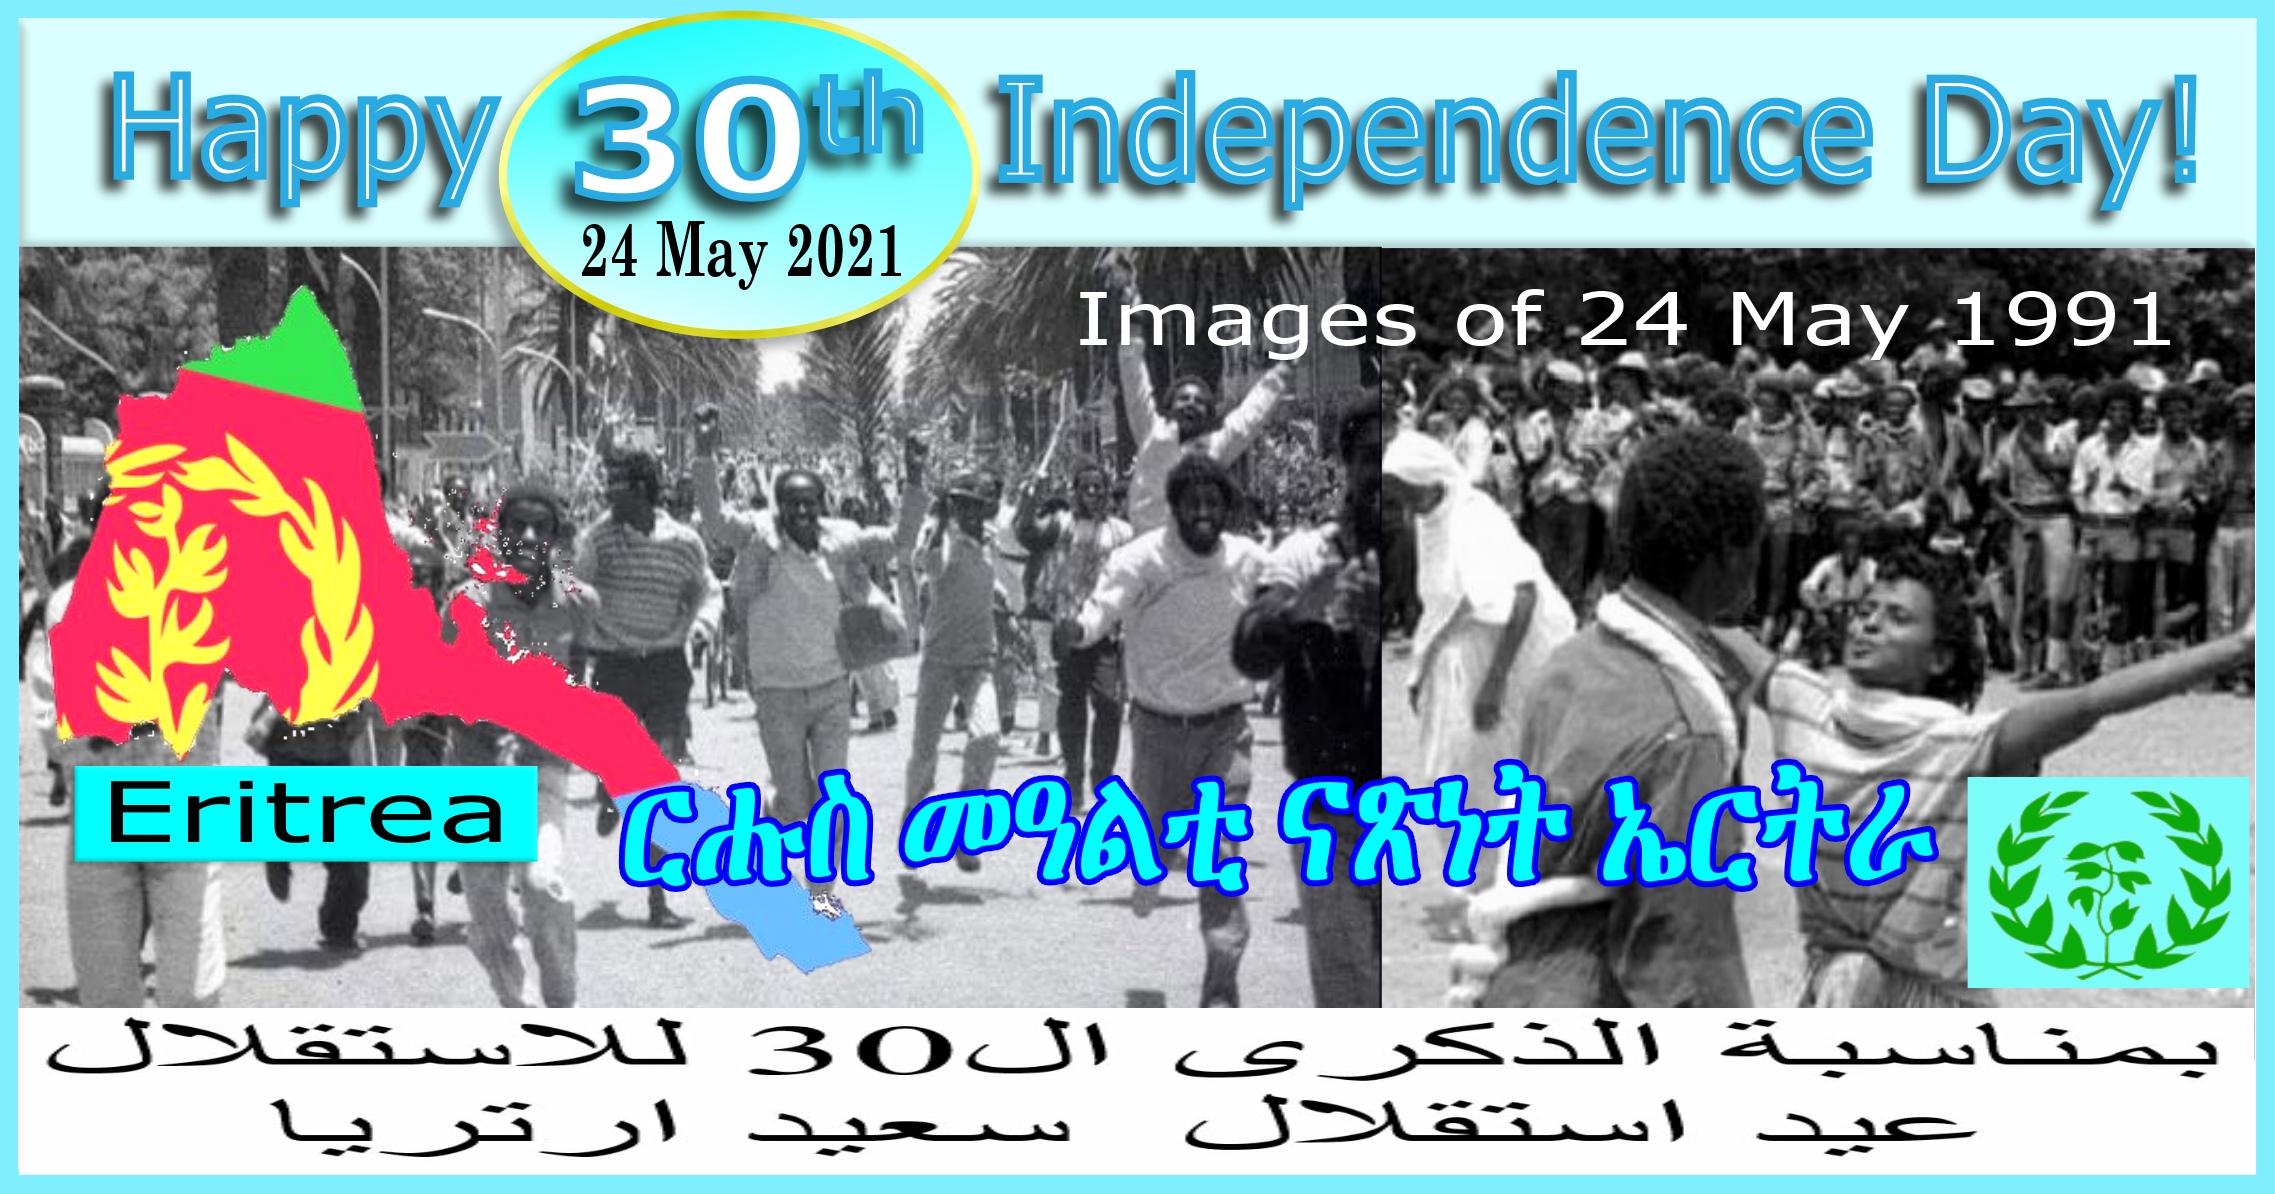 Reflections on 30th Eritrea independence day